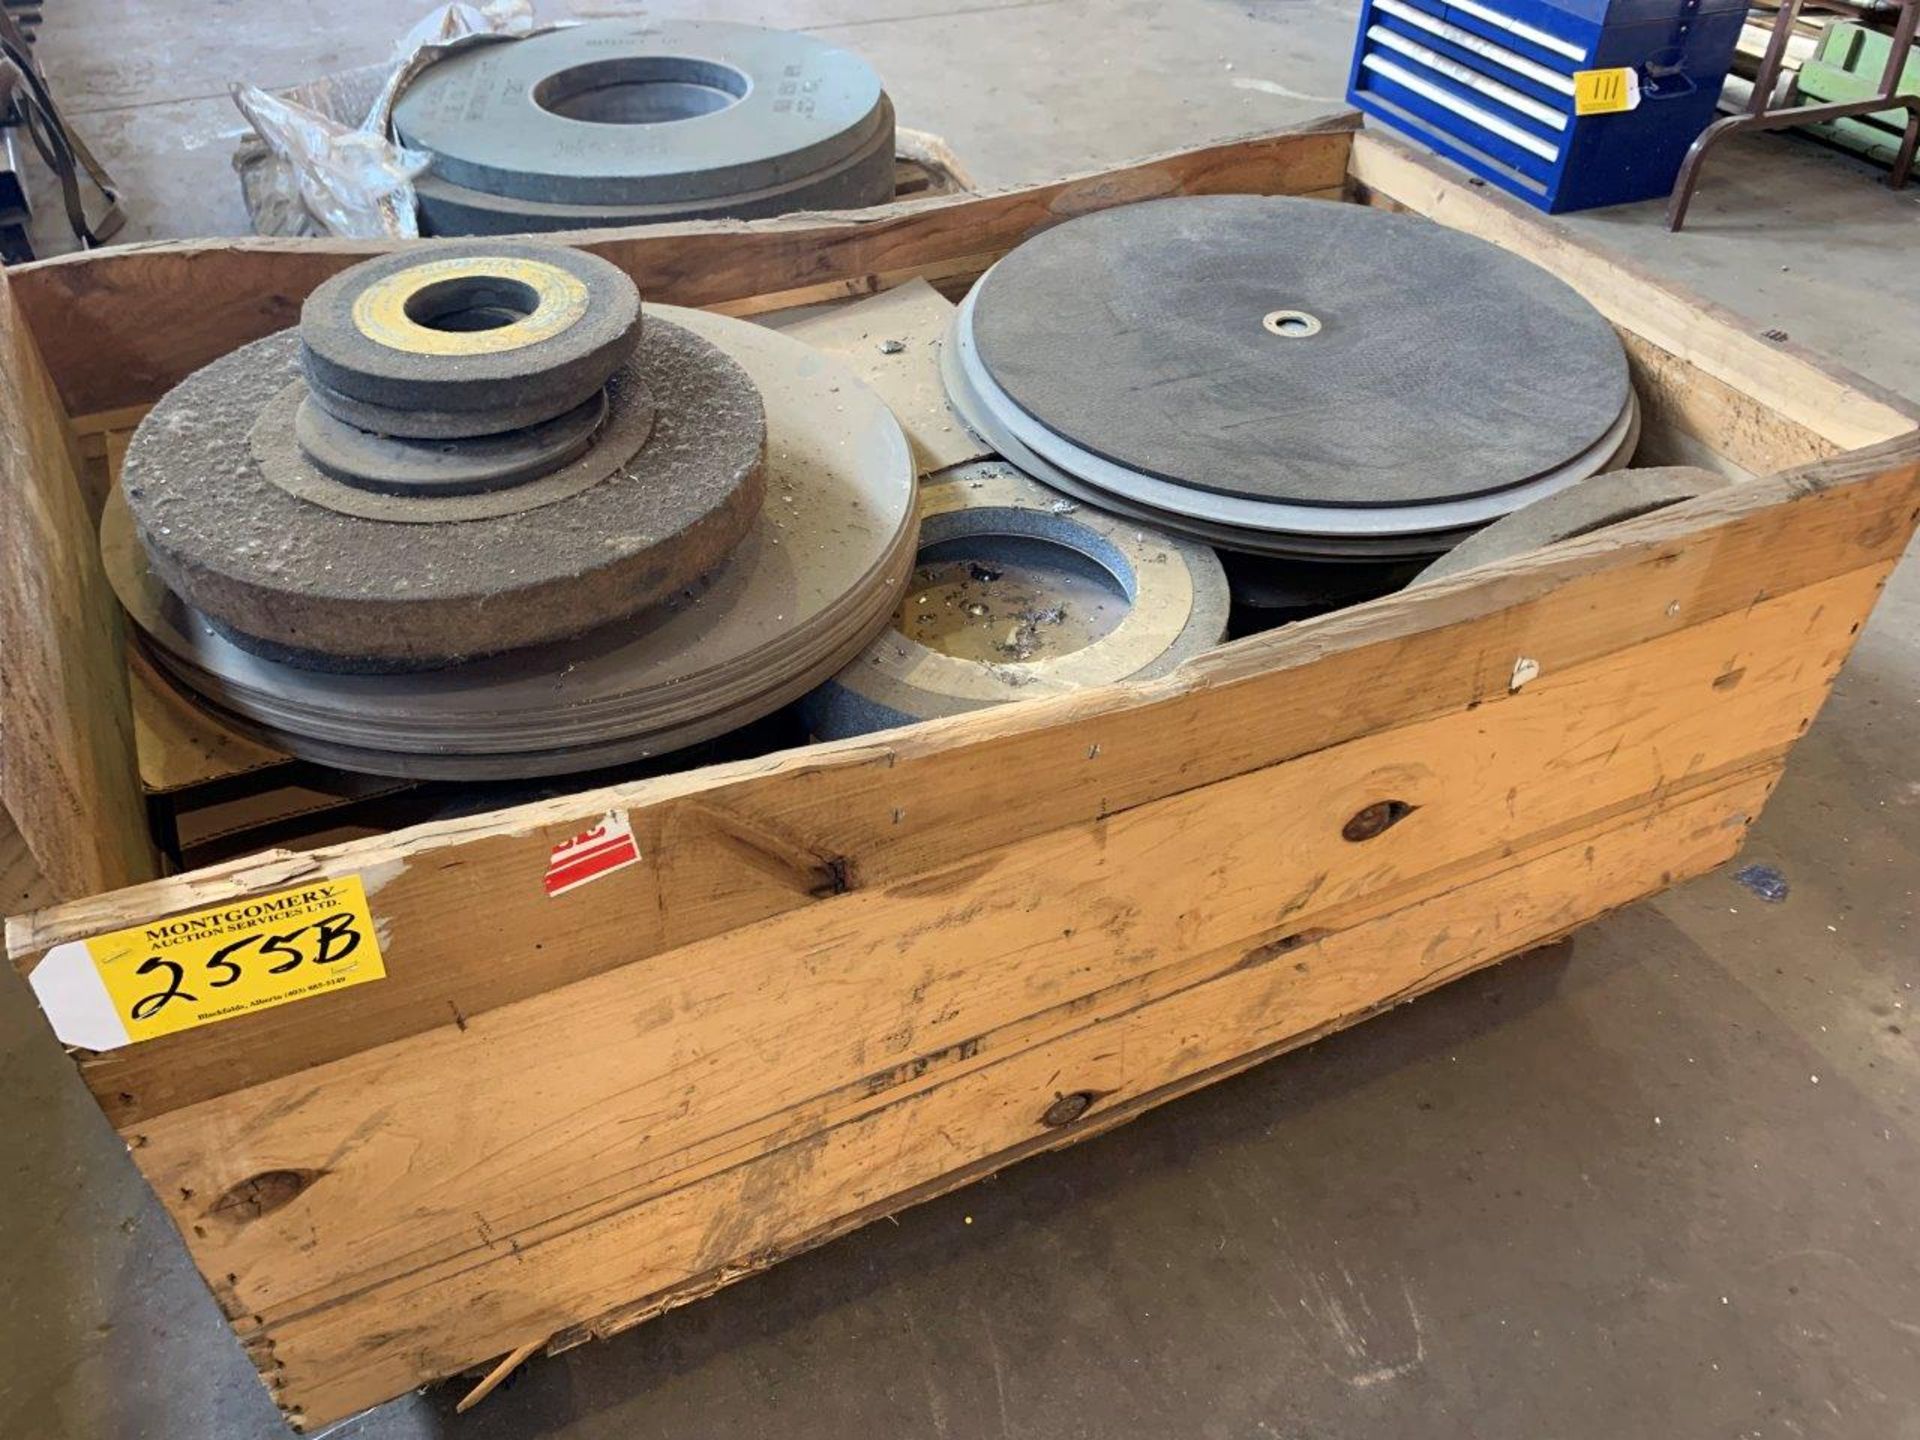 L/O LARGE GRINDING WHEELS AND CUTTING DISCS - Image 2 of 2